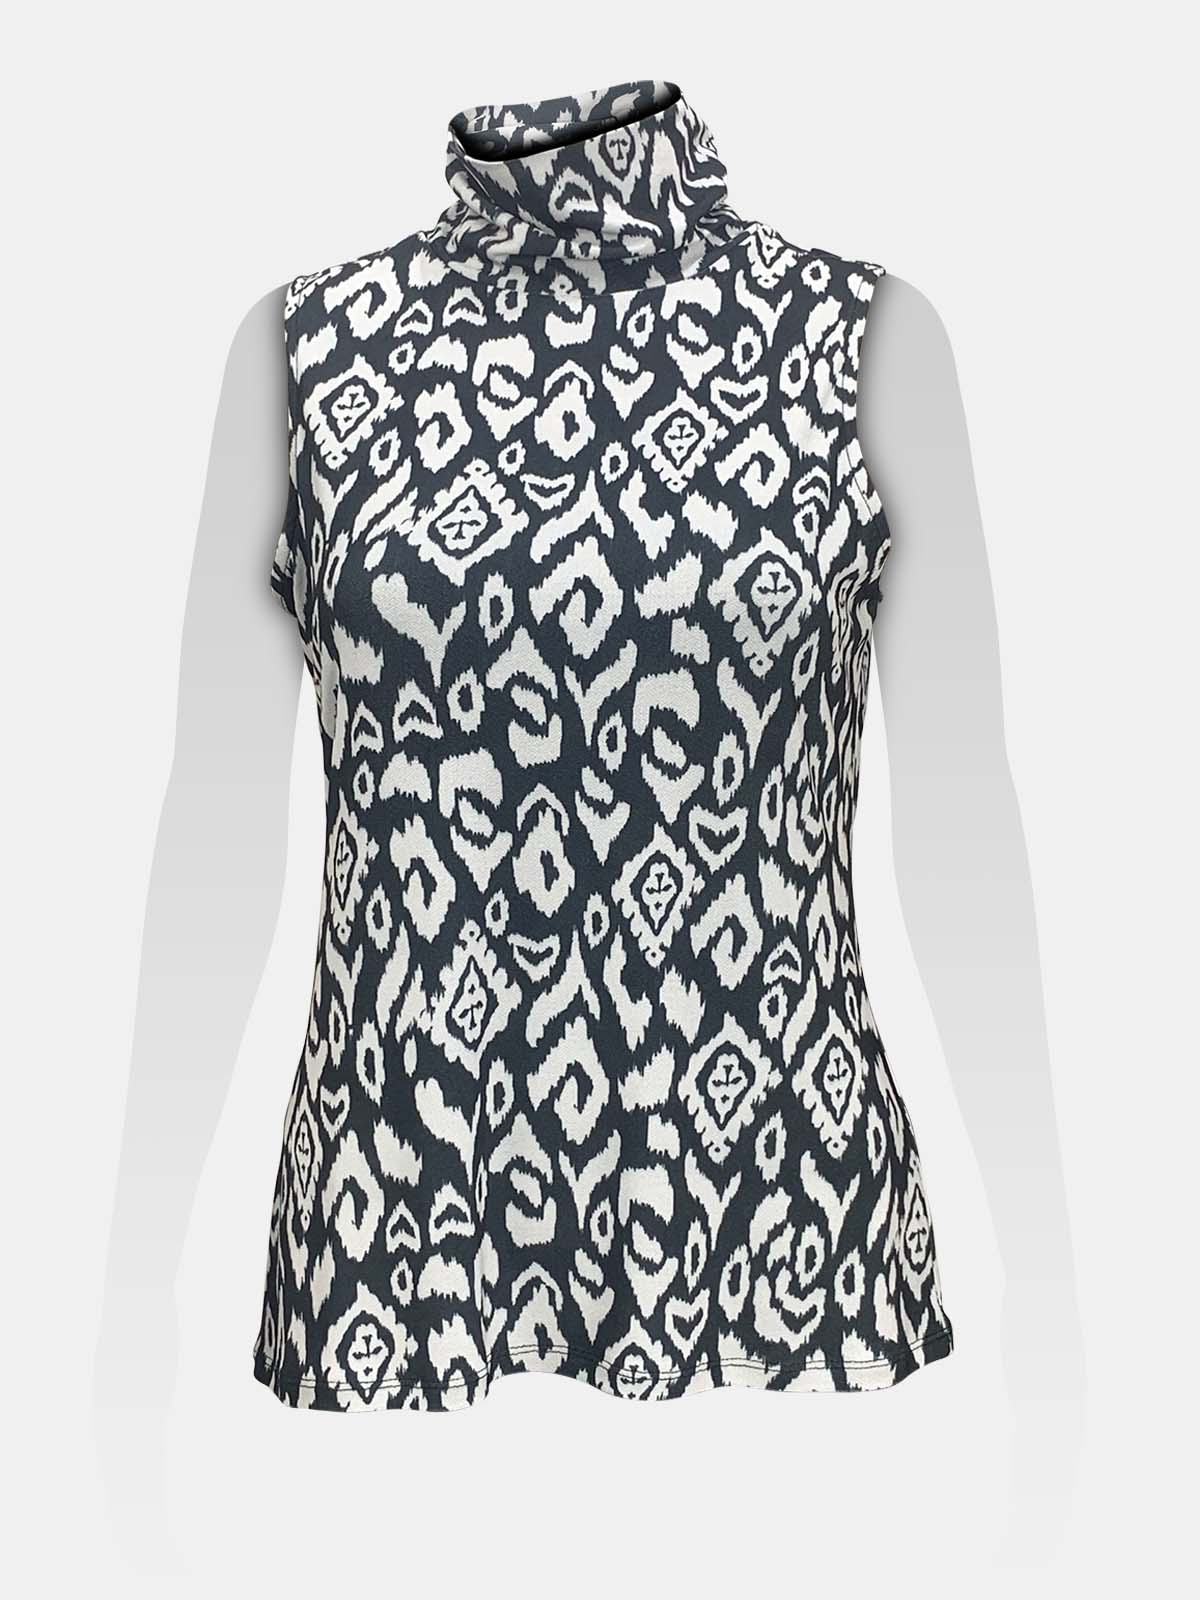 print-all-over-sleeveless-top